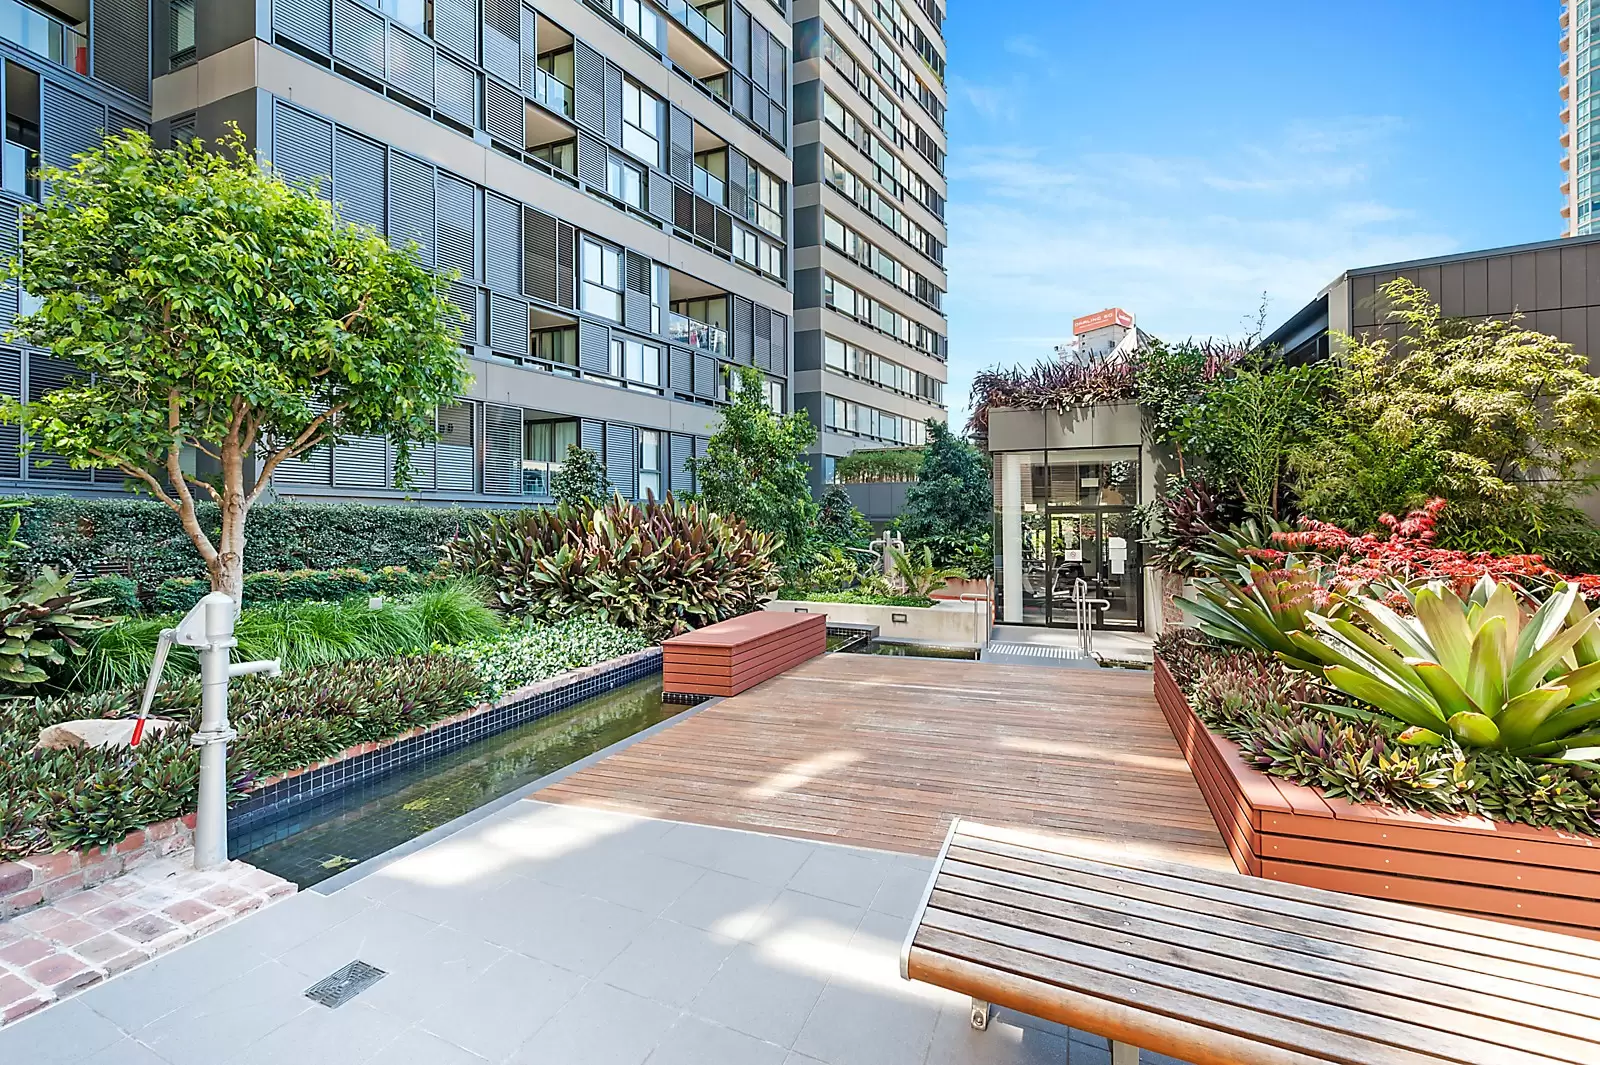 Photo #7: 702/33 Ultimo Road, Haymarket - Sold by Sydney Sotheby's International Realty